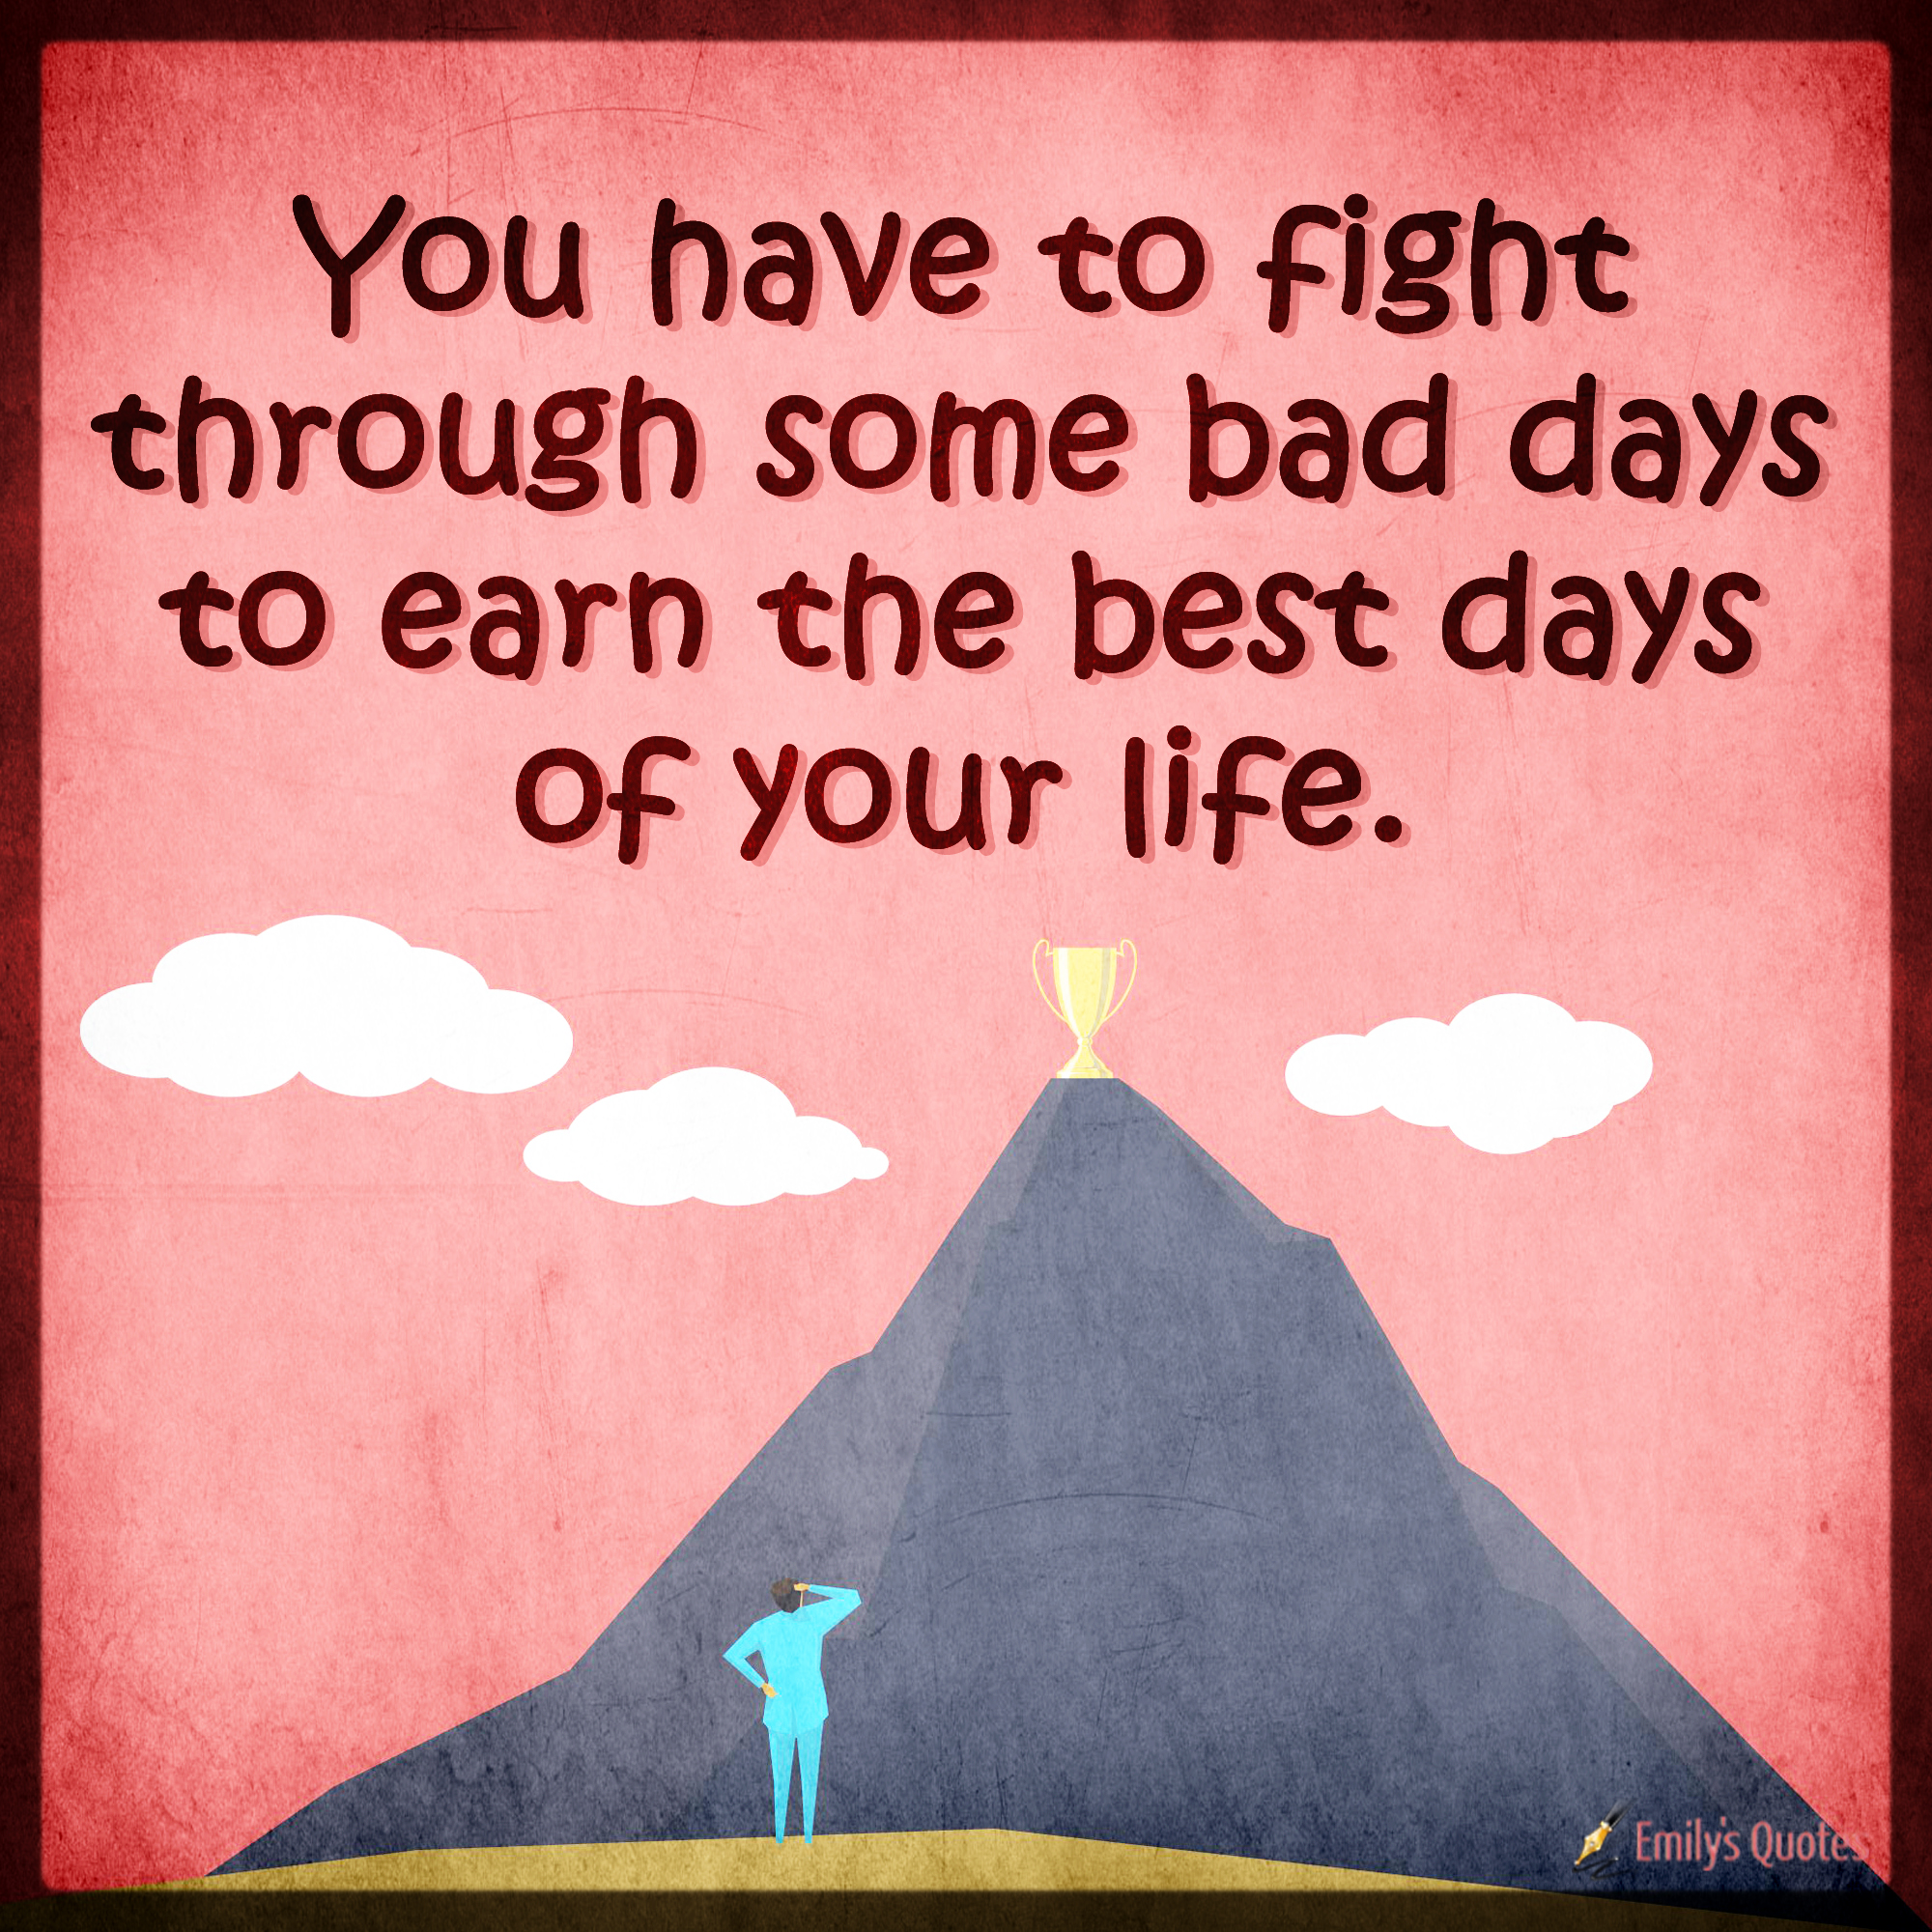 You have to fight through some bad days to earn the best days of your life